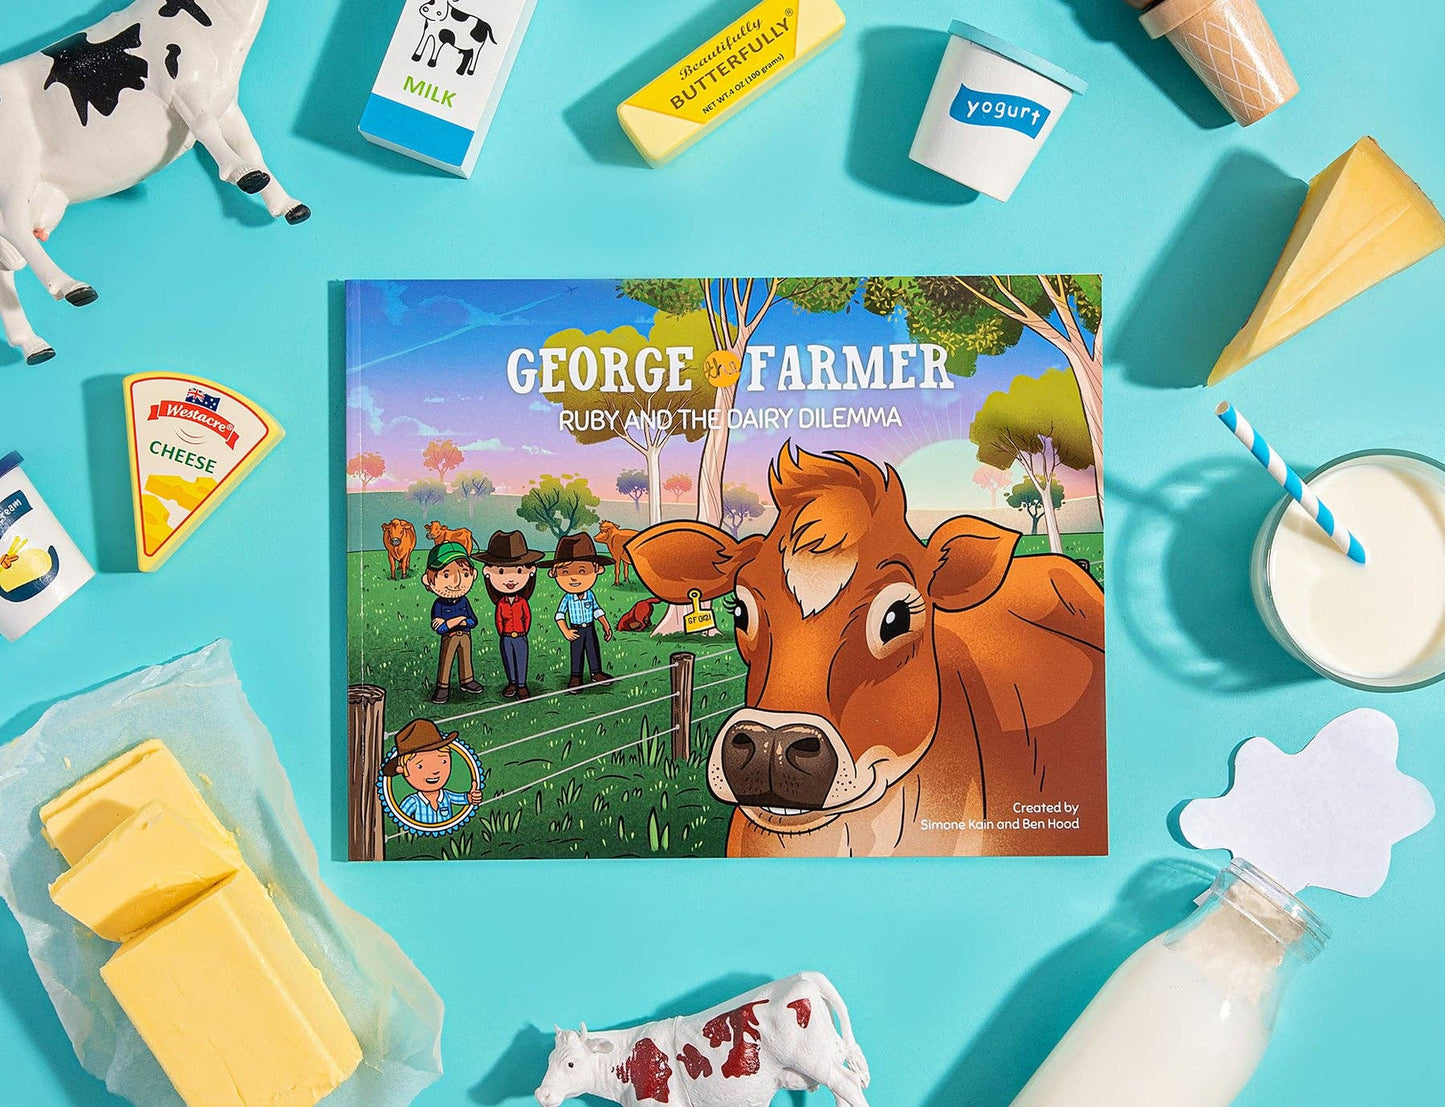 George the Farmer | Ruby and the Dairy Dilemma